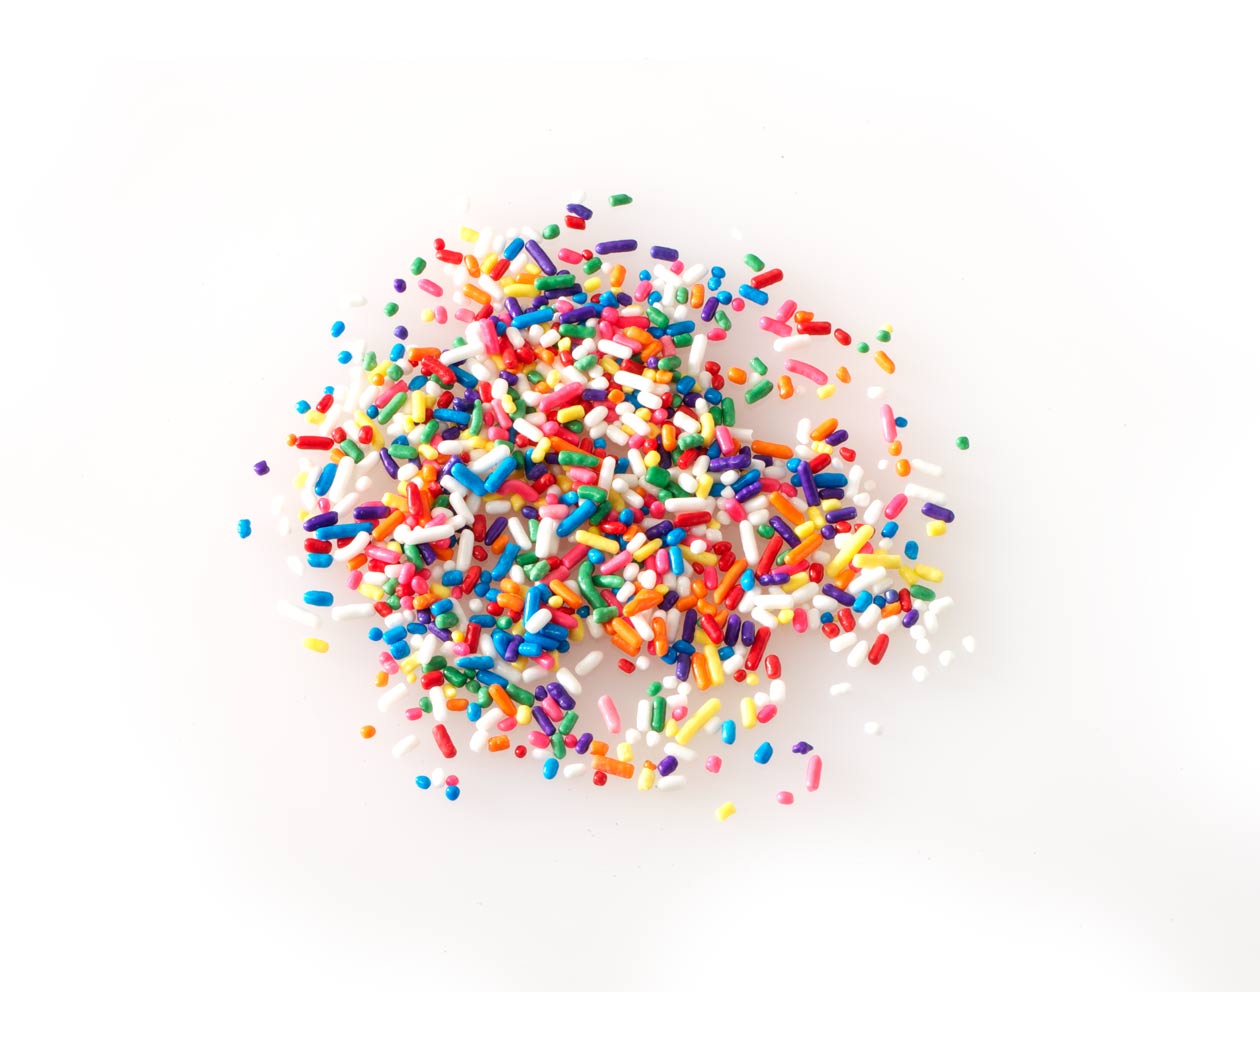 Picture #3170383 - sprinkles clipart pile. sprinkles clipart pile. 